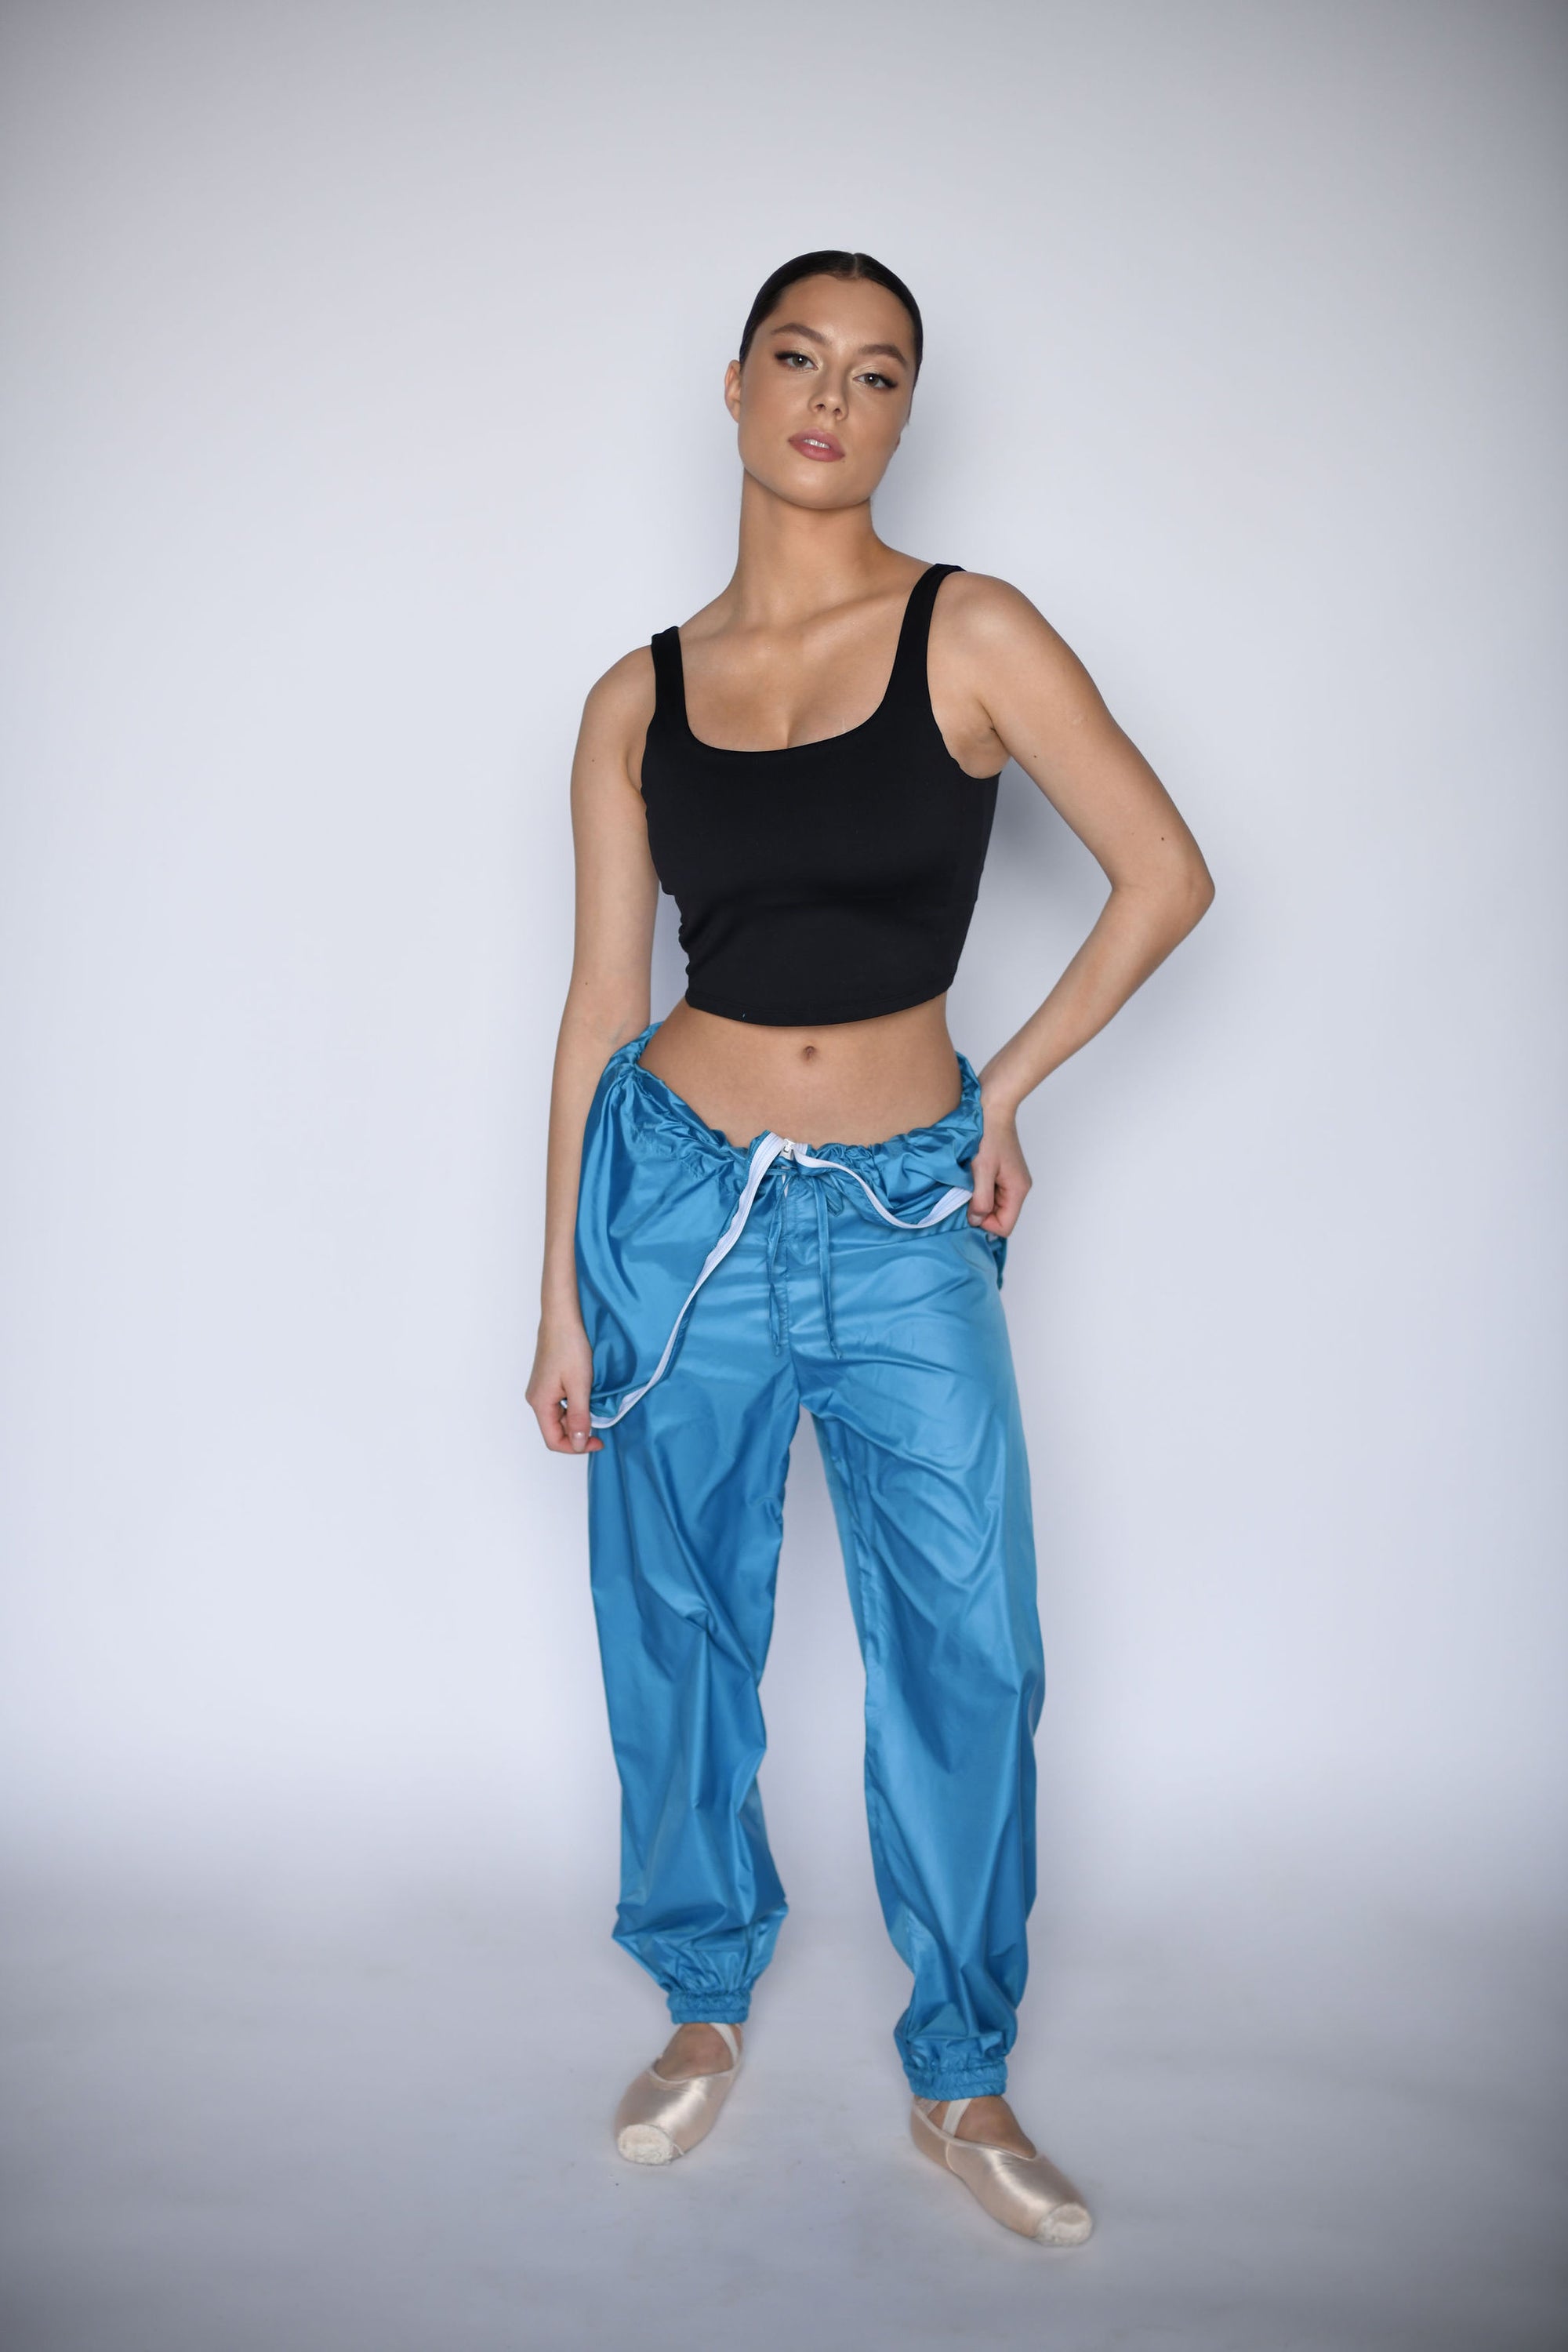 NEW URBAN SWAN COLLECTION S/S 23 | Ice blue jumpsuit